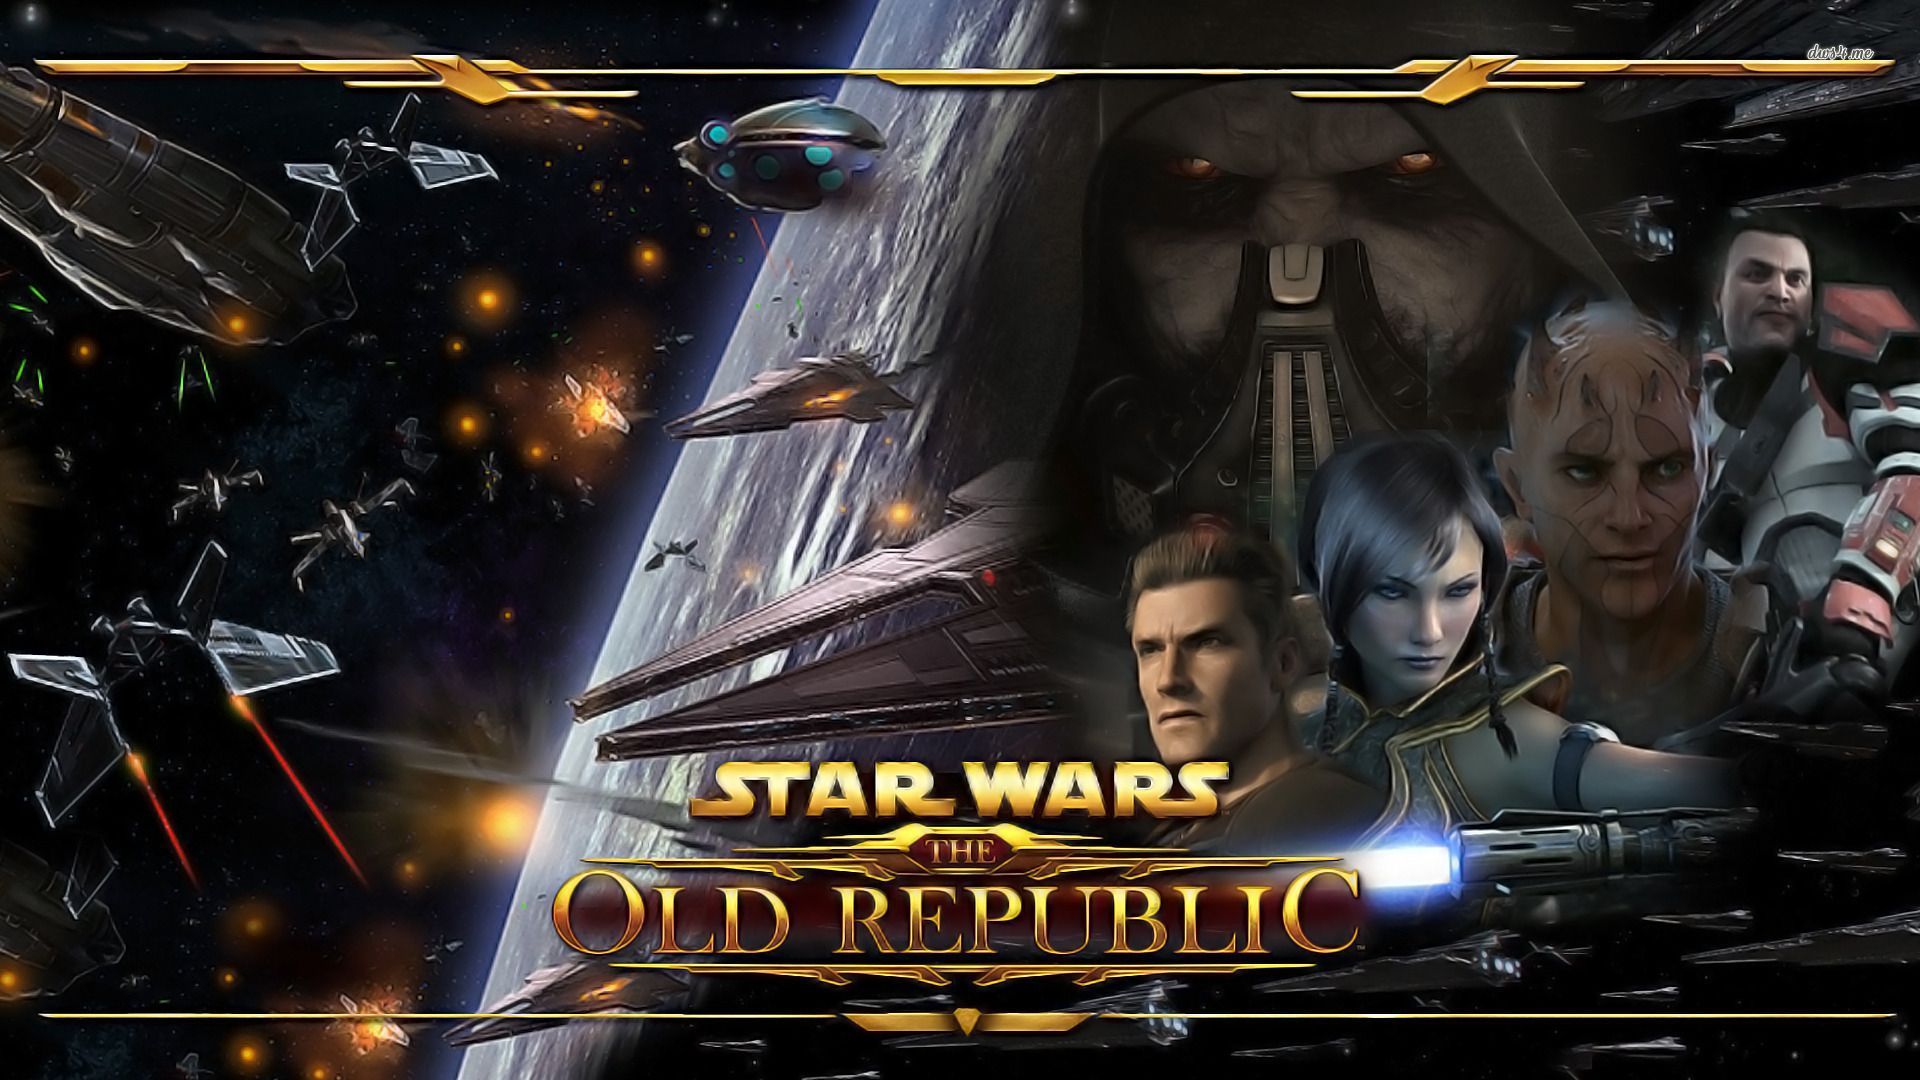 Star Wars - The Old Republic wallpaper - Game wallpapers -